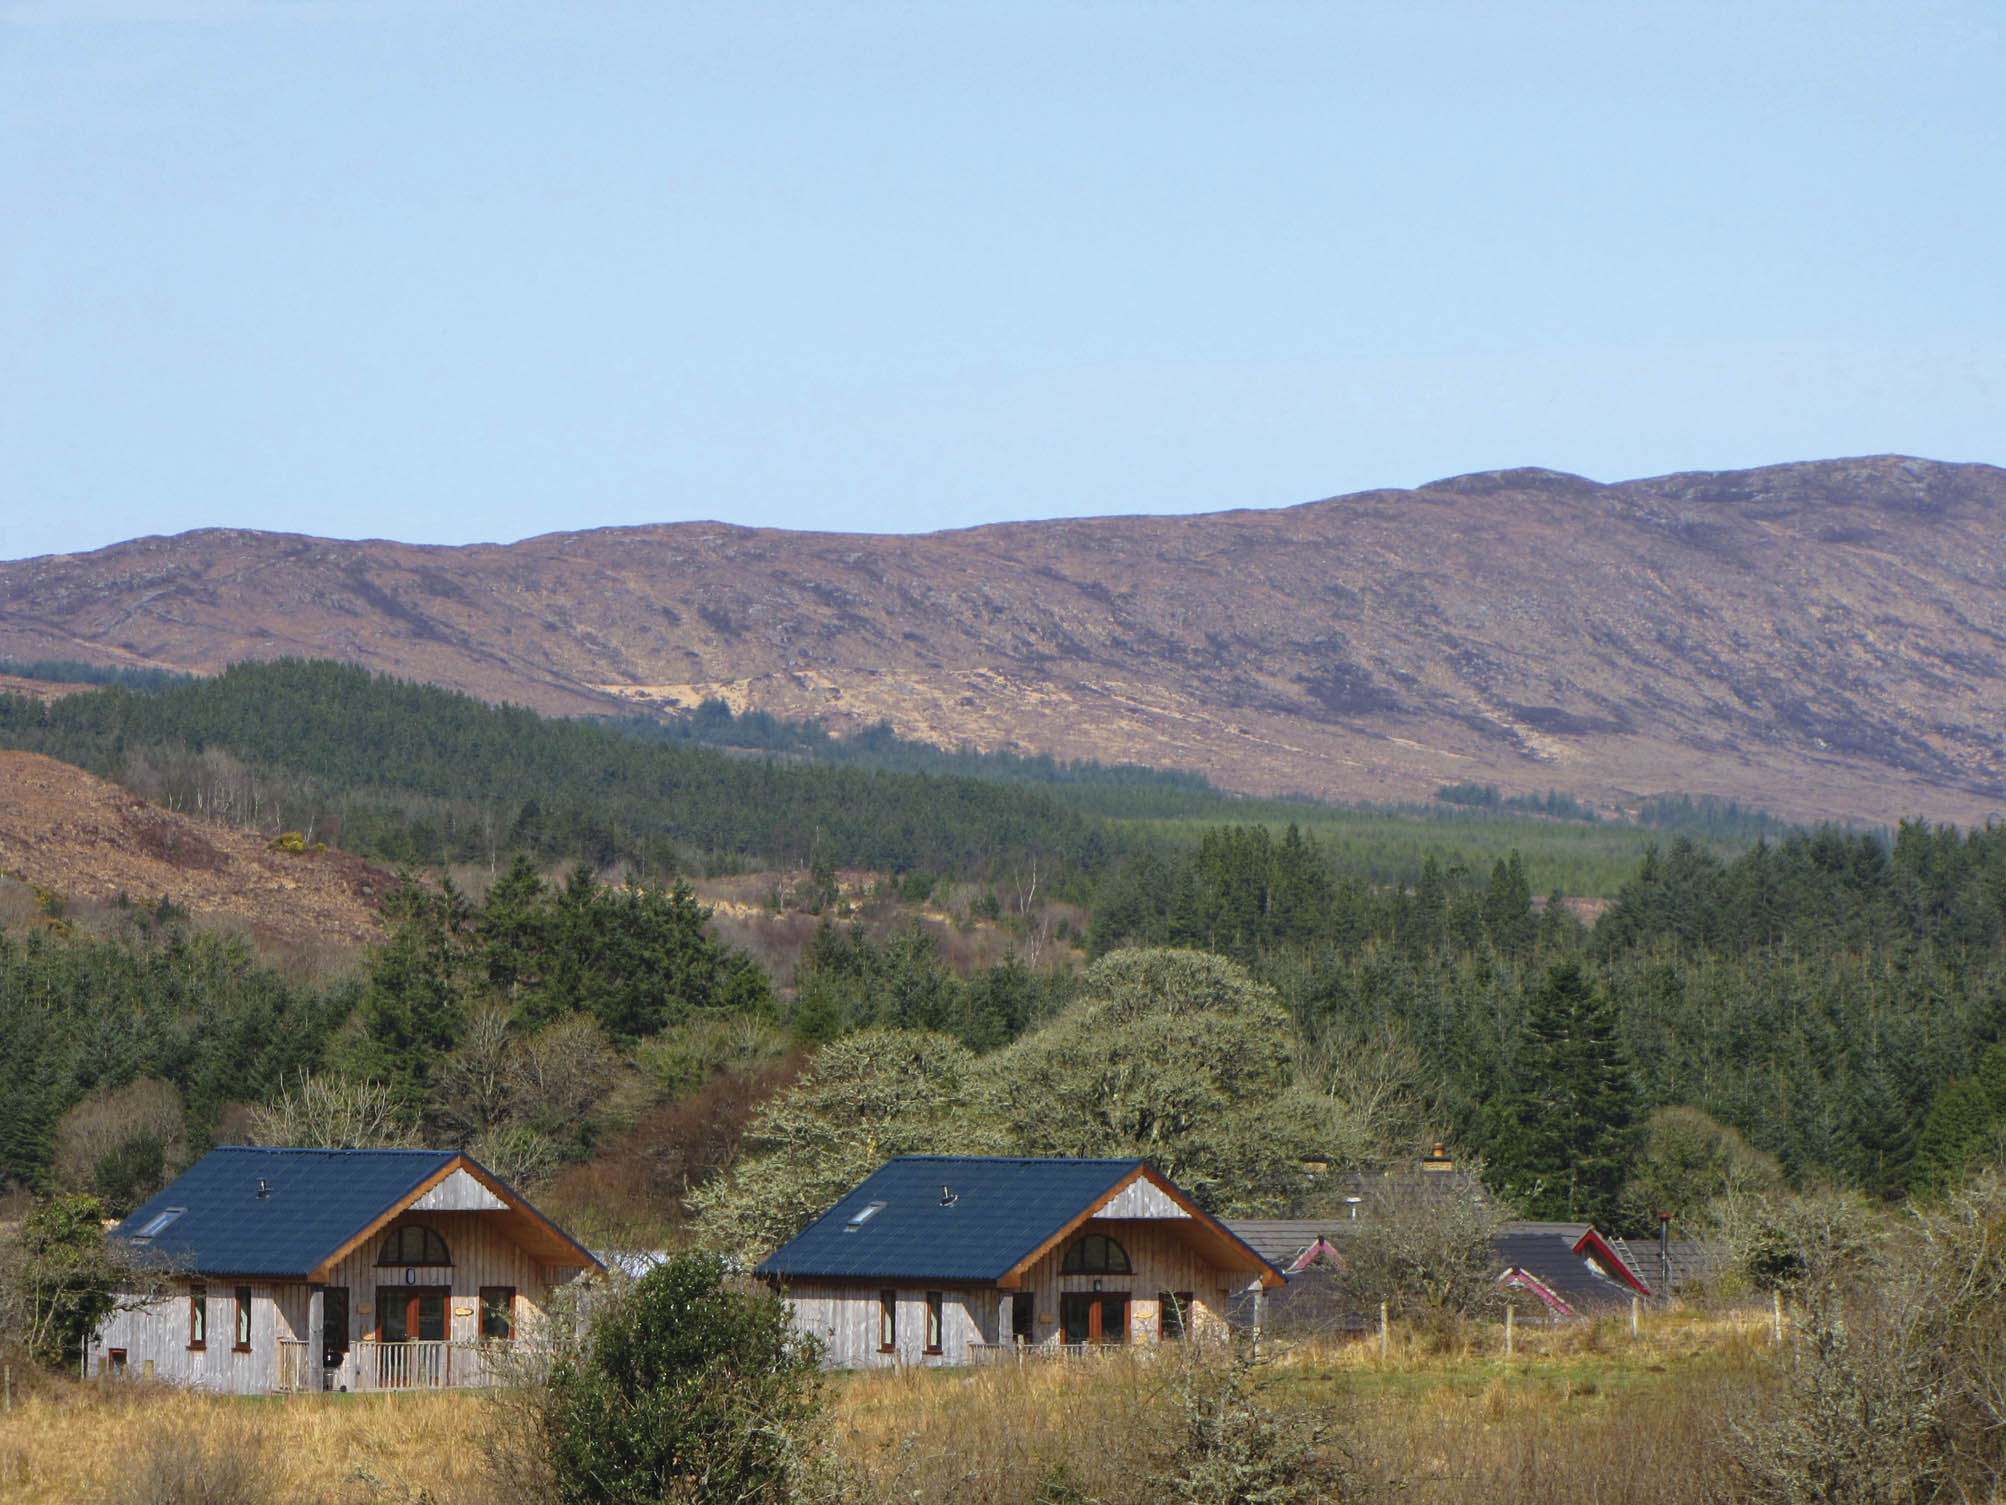 The cabins at Ard Nahoo, Co. Leitrim, where the importance of simple pleasures is emphasized.